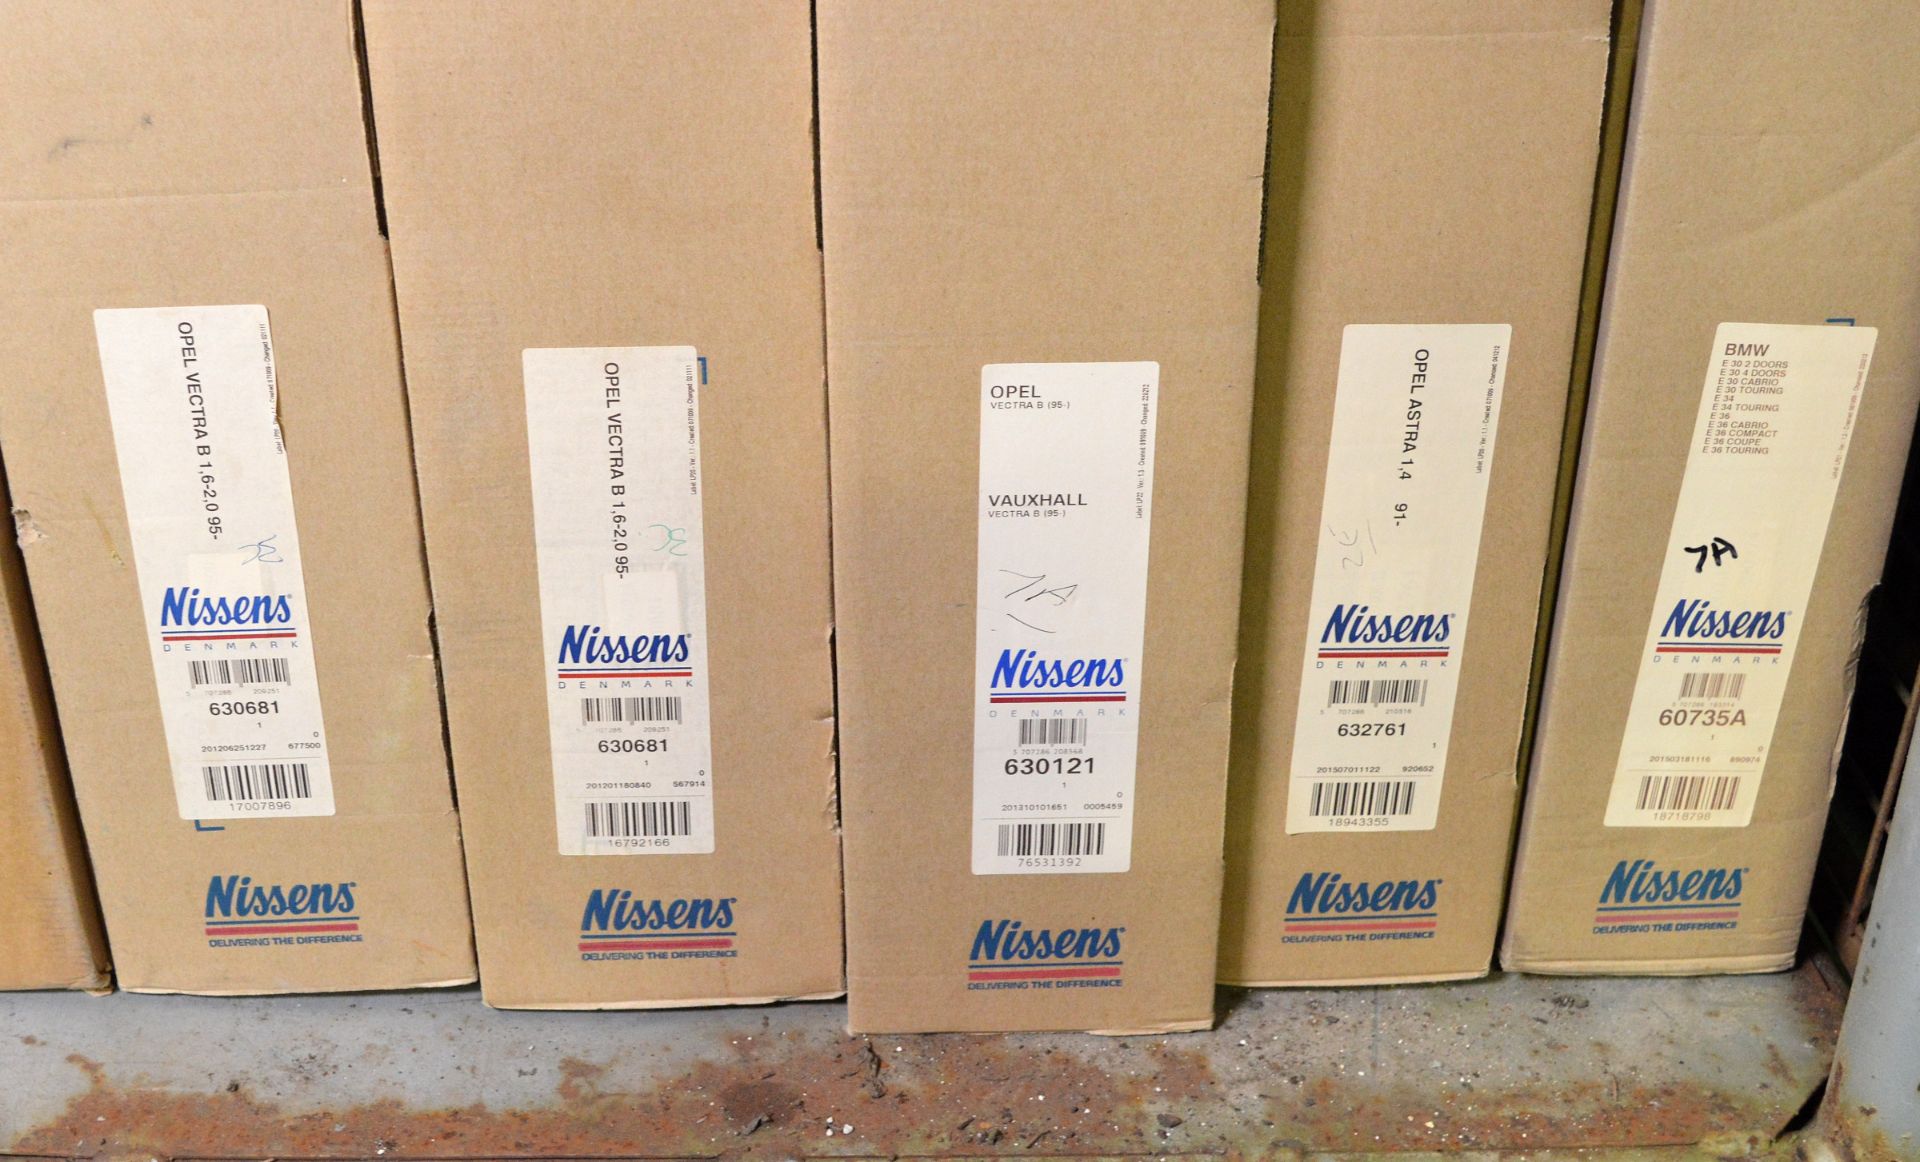 Vehicle parts - Nissen radiators - see pictures for models and types - Image 3 of 4